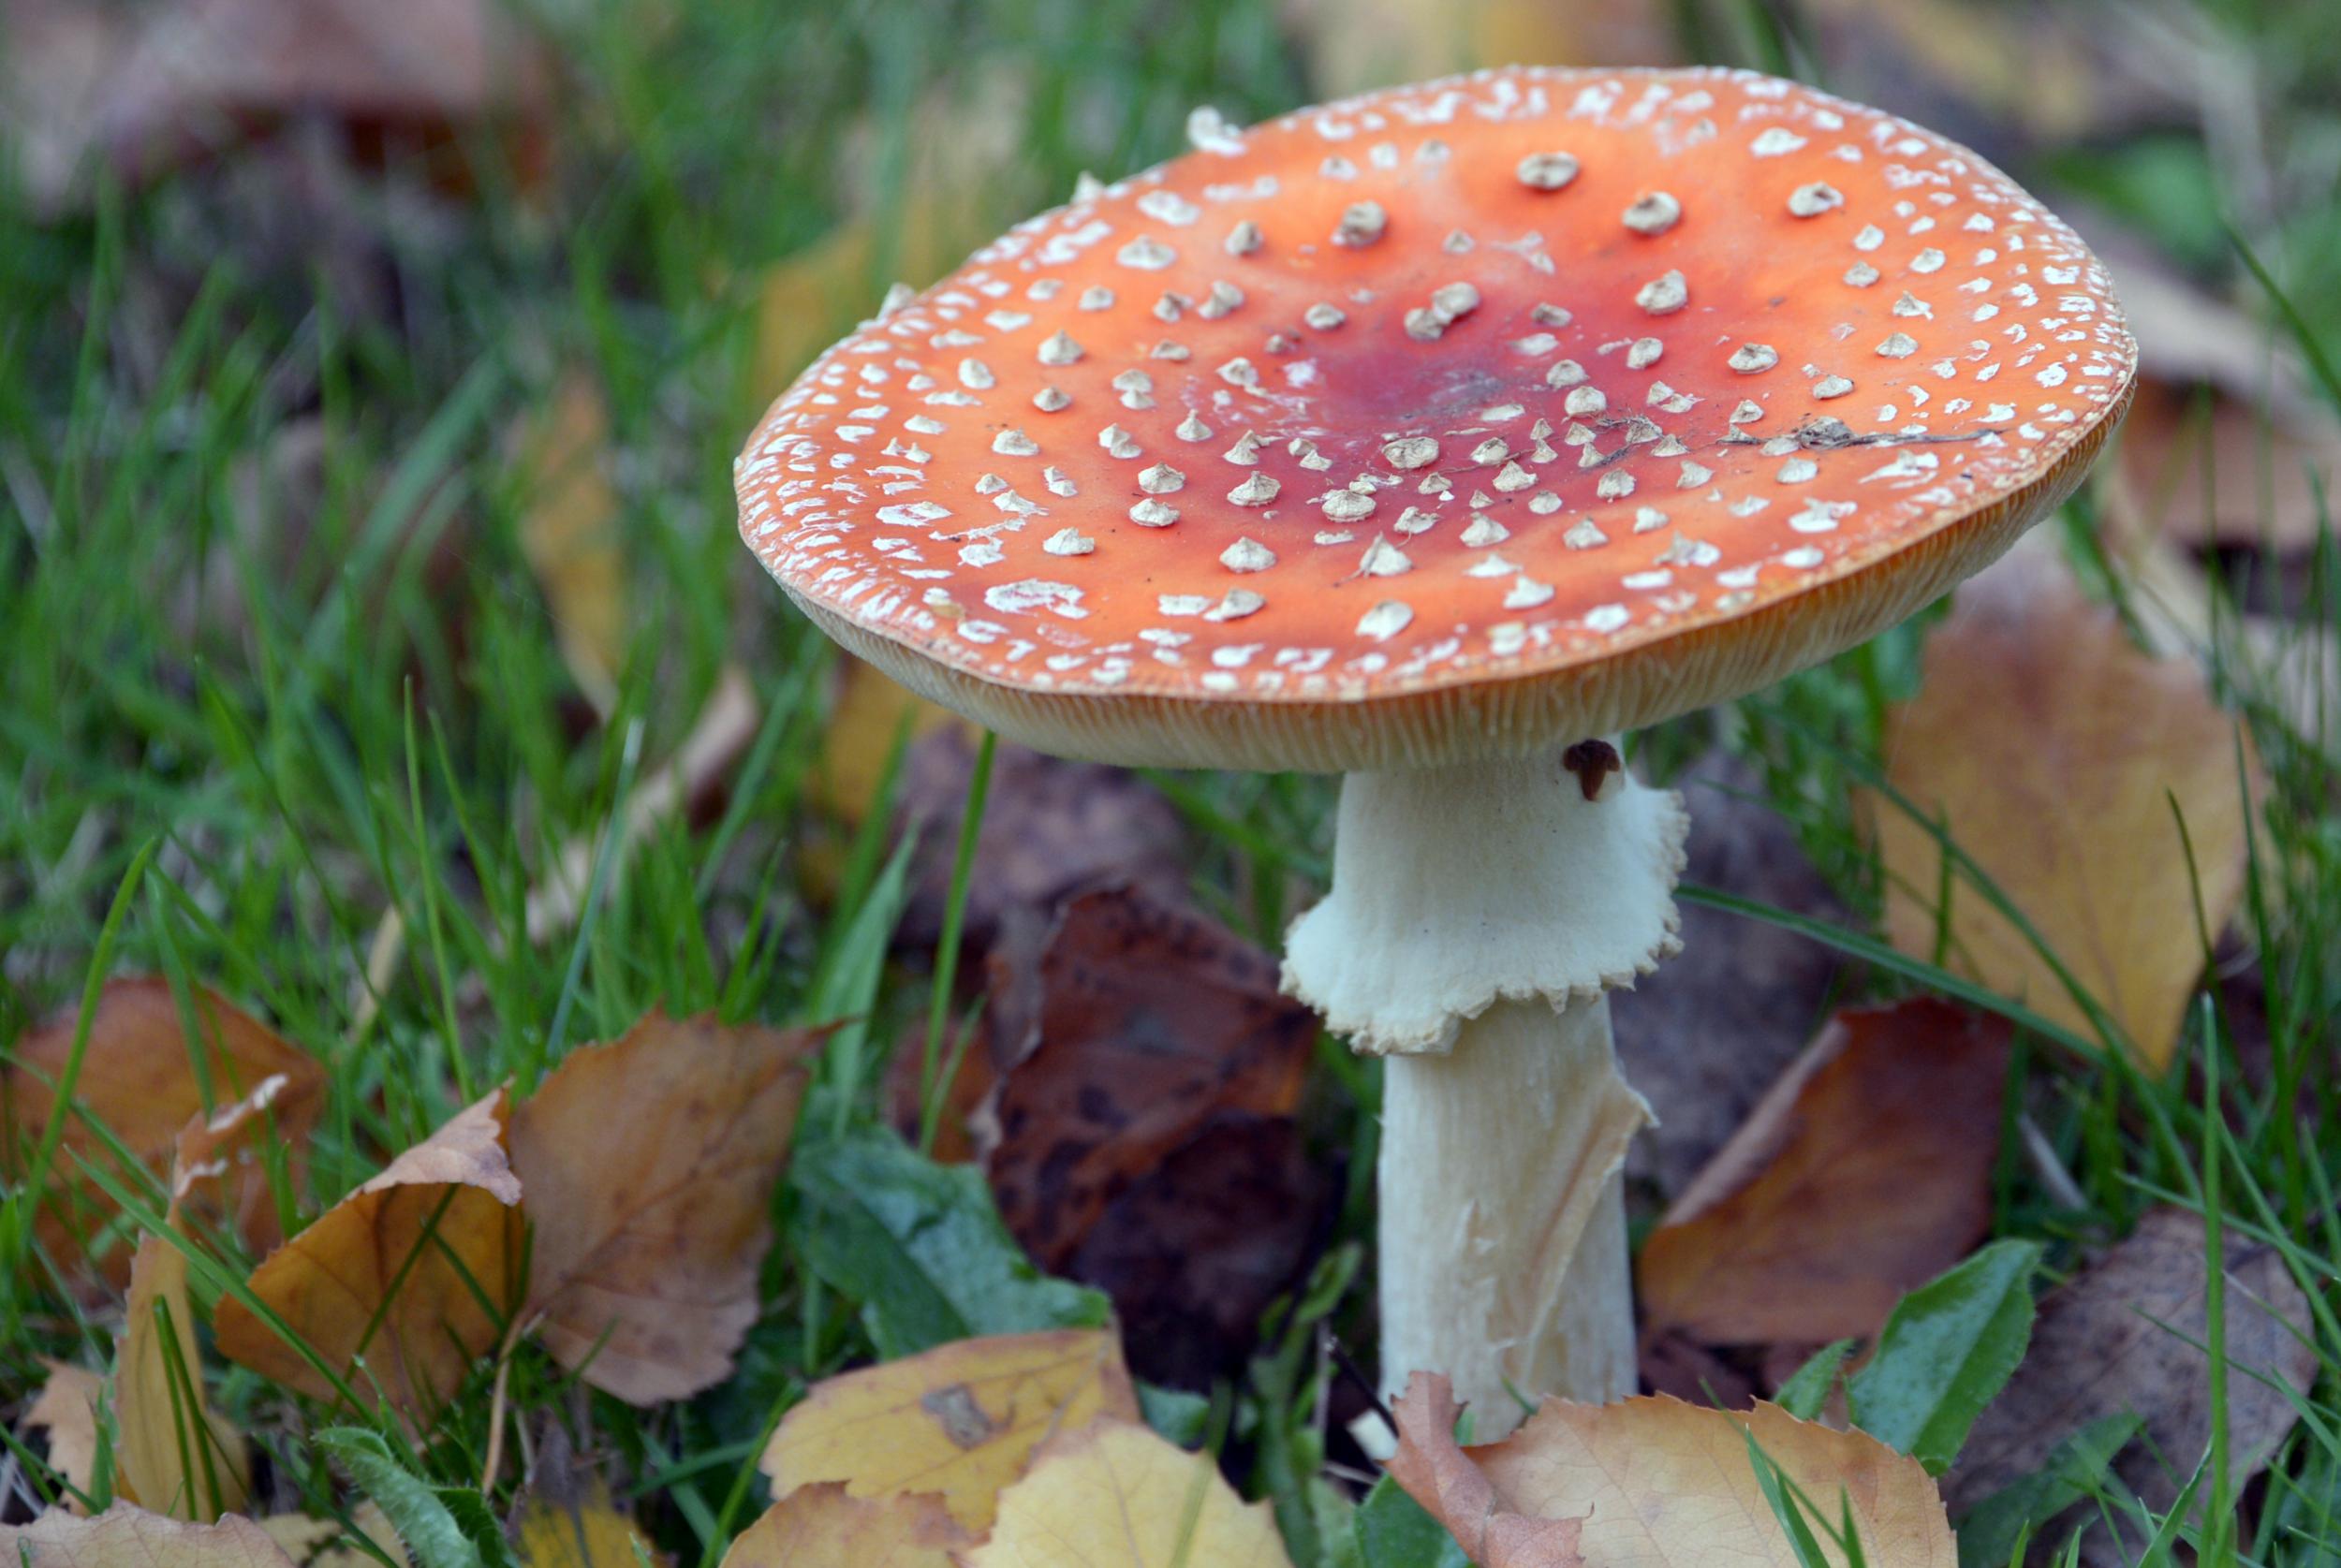 The notorious fly agaric mushroom, which is not known for instantly causing women to orgasm